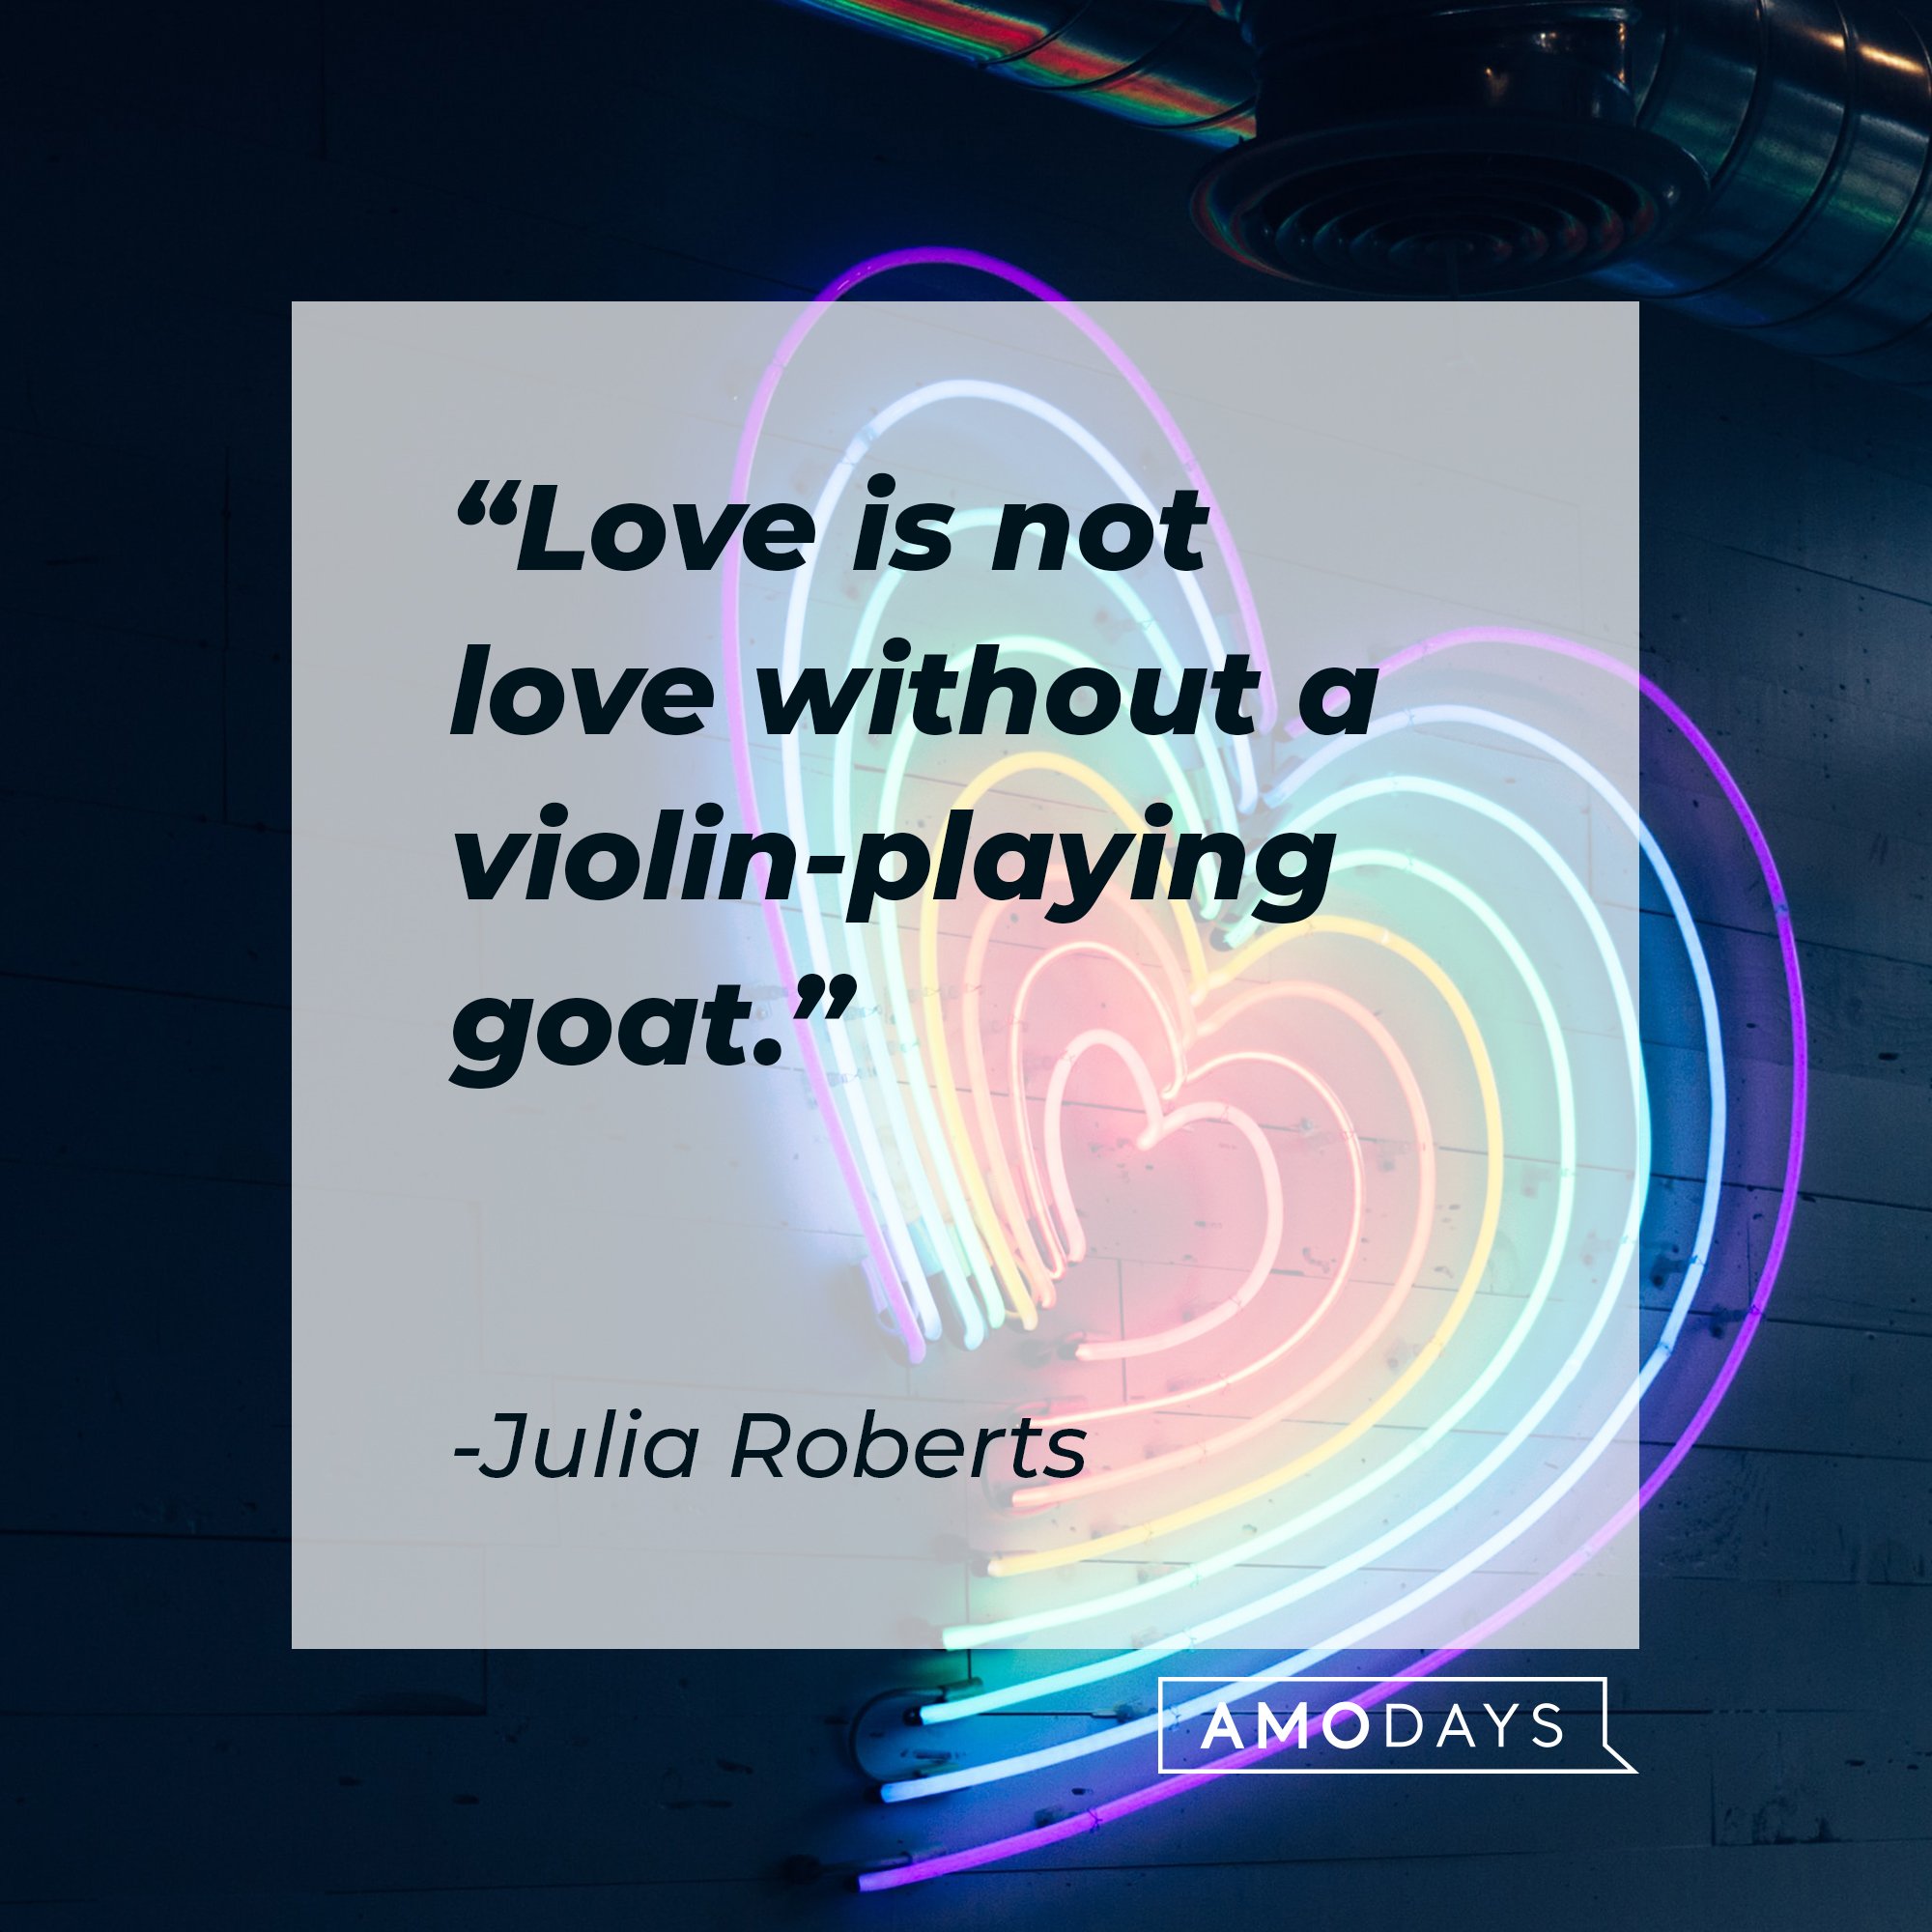 Julia Roberts’ quote: "Love is not love without a violin-playing goat." | Image: AmoDays 